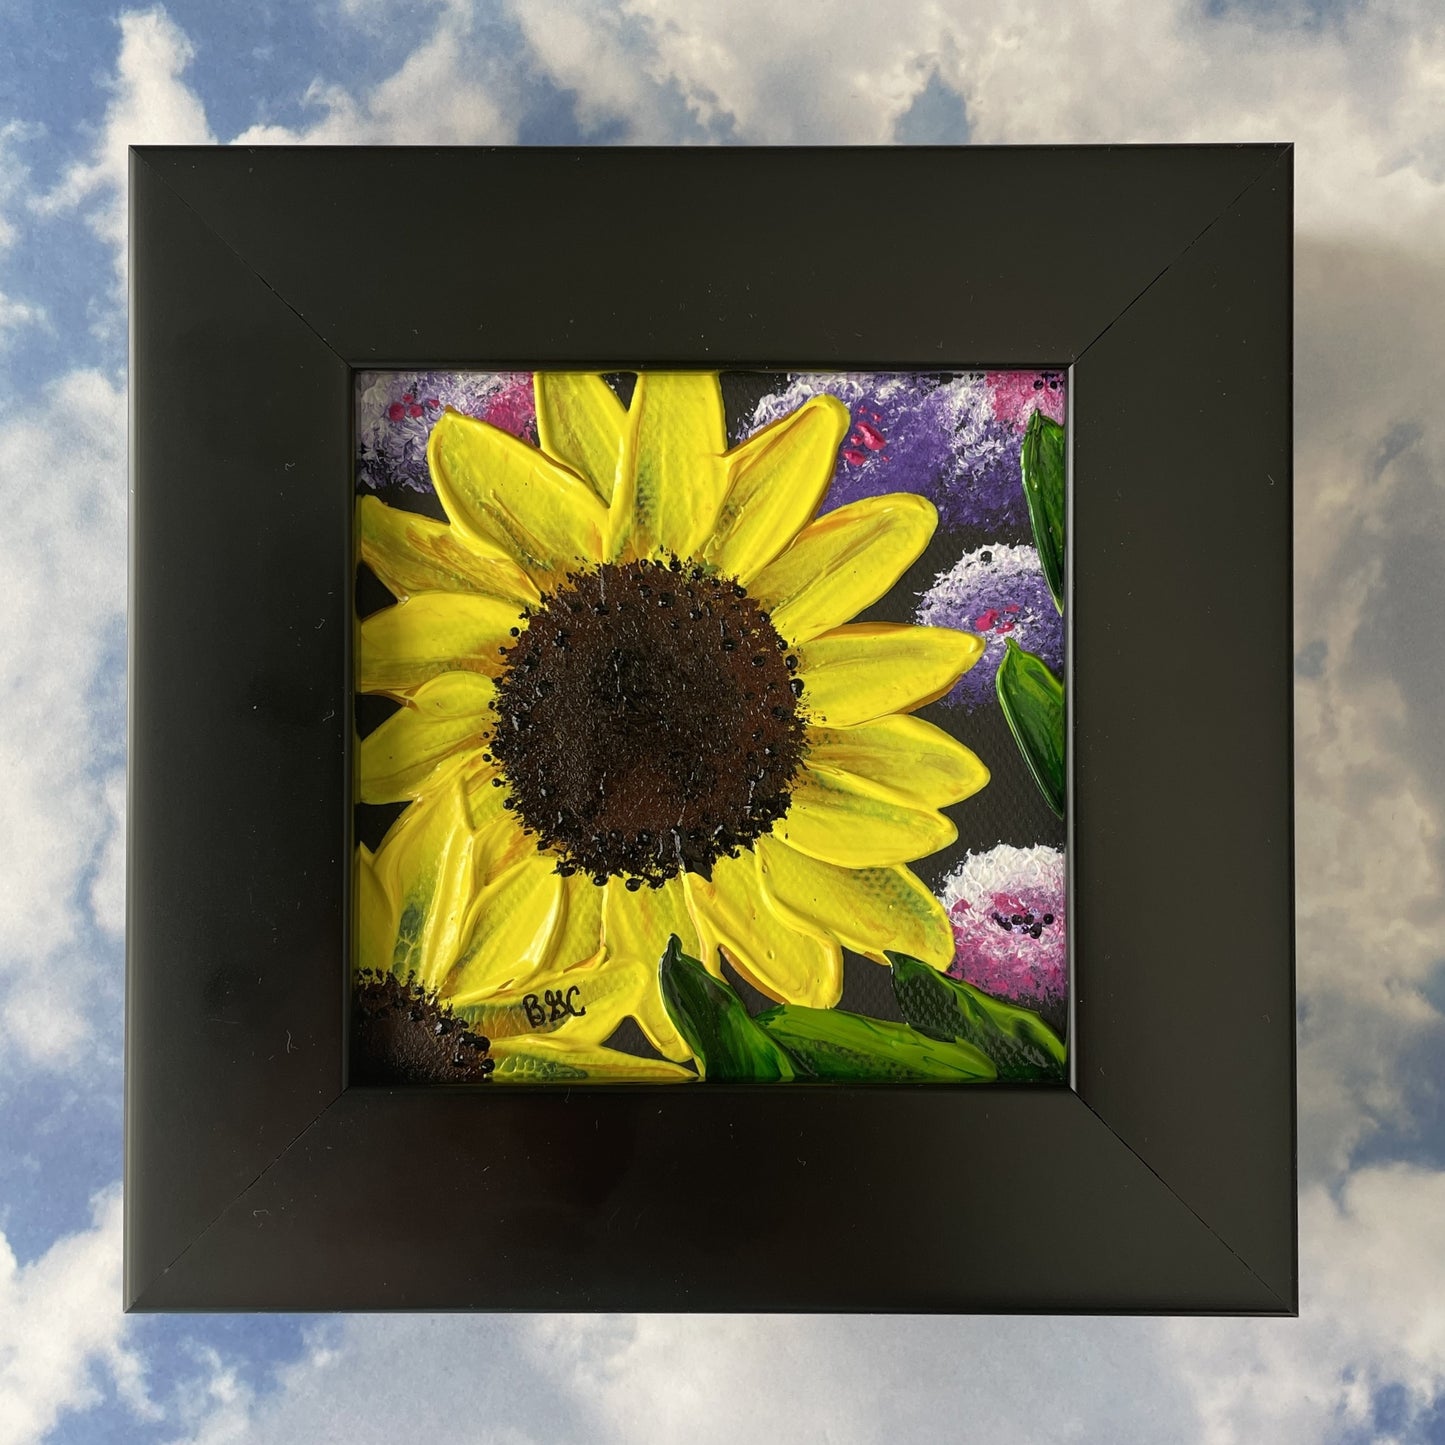 Sunflowers in Frame Thick impasto Original Painting in Frame